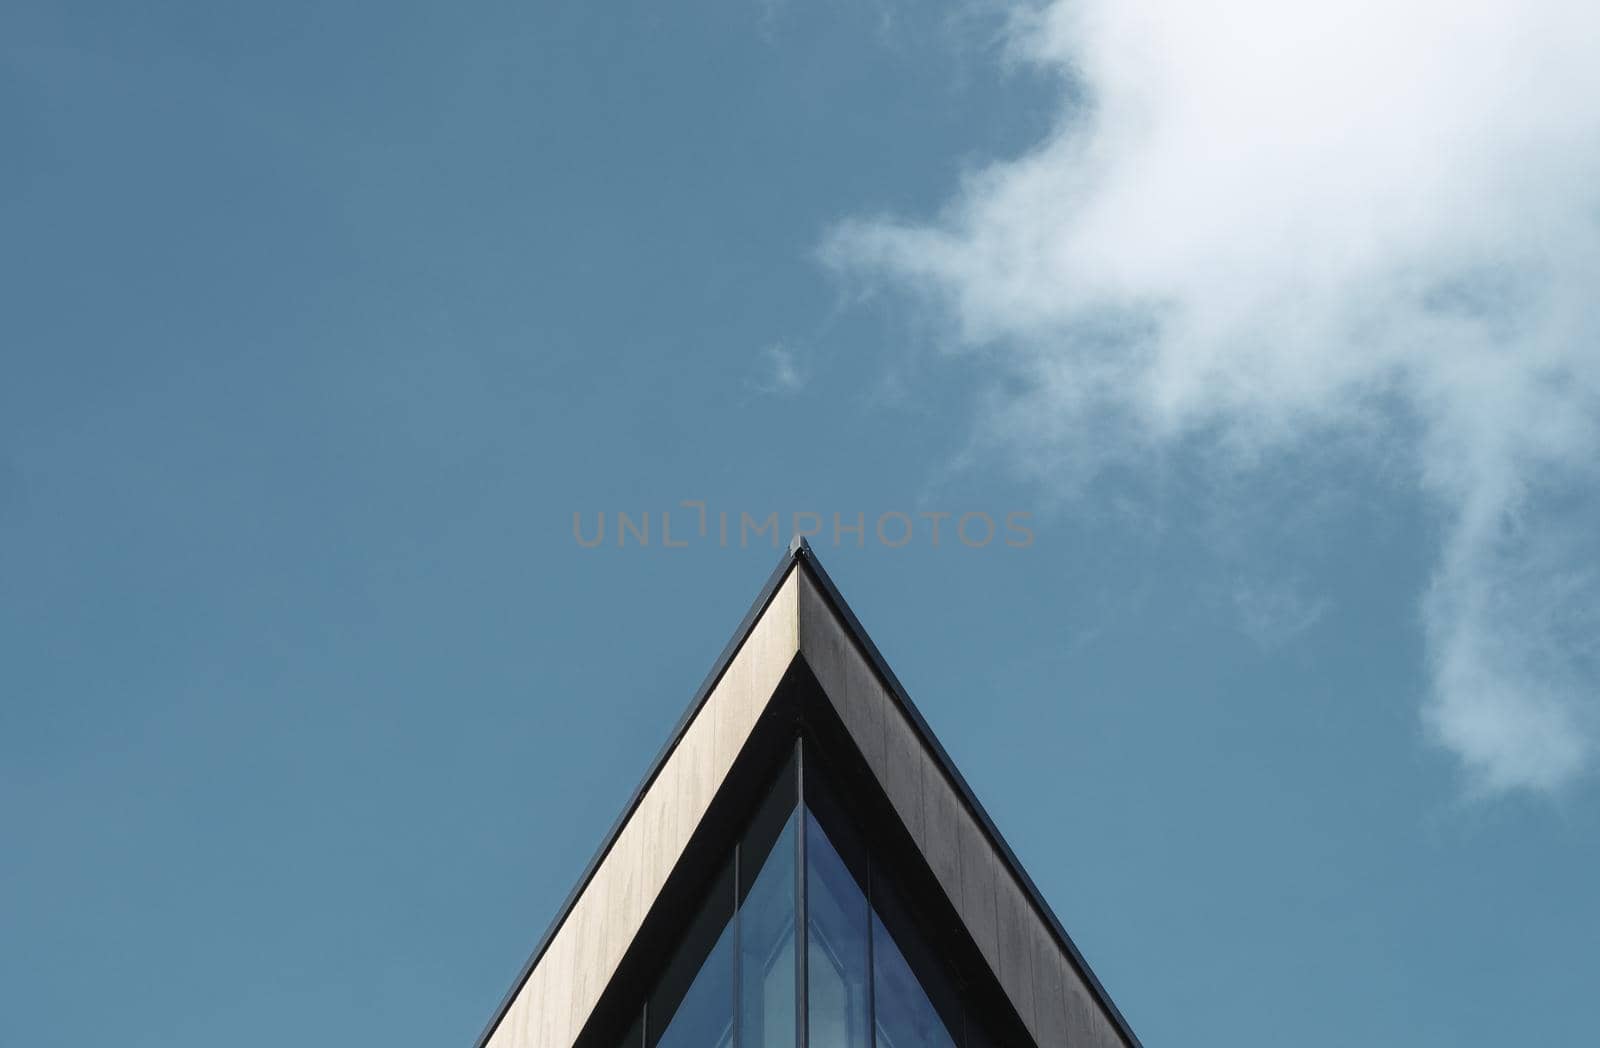 Abstract Architectural Image Of A Triangular Building Against A Blue Sky WIth Clouds And Copy Space